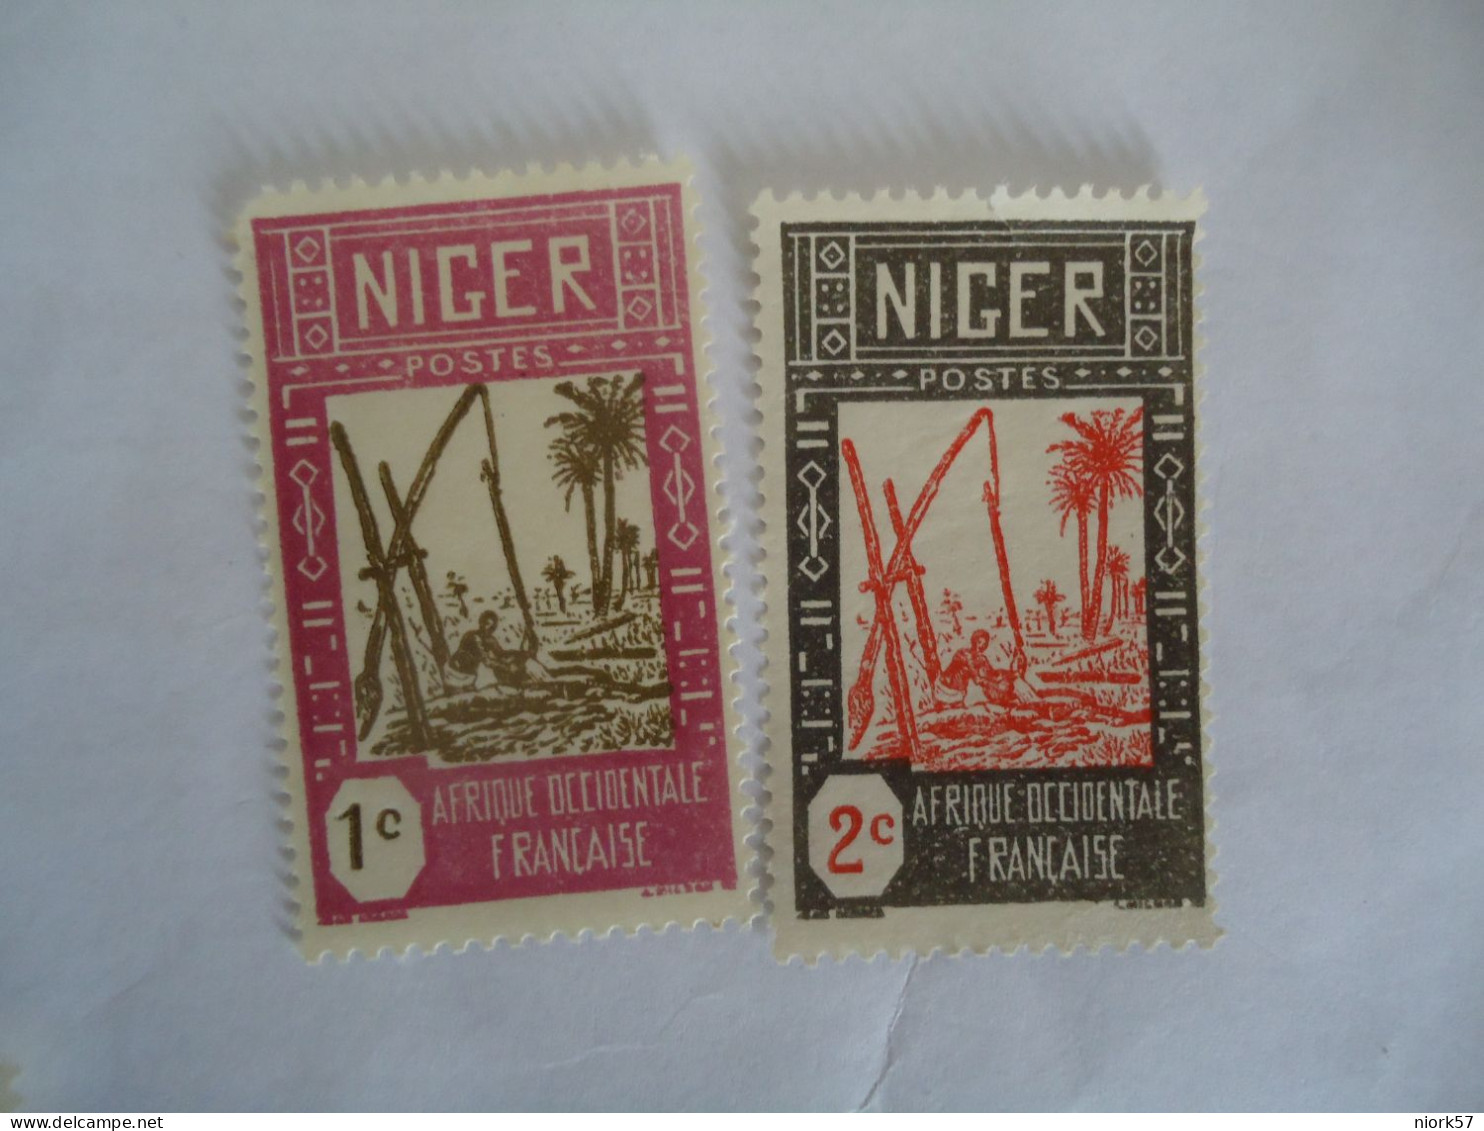 NIGER MLN 2 STAMPS WORKERS - Nuovi